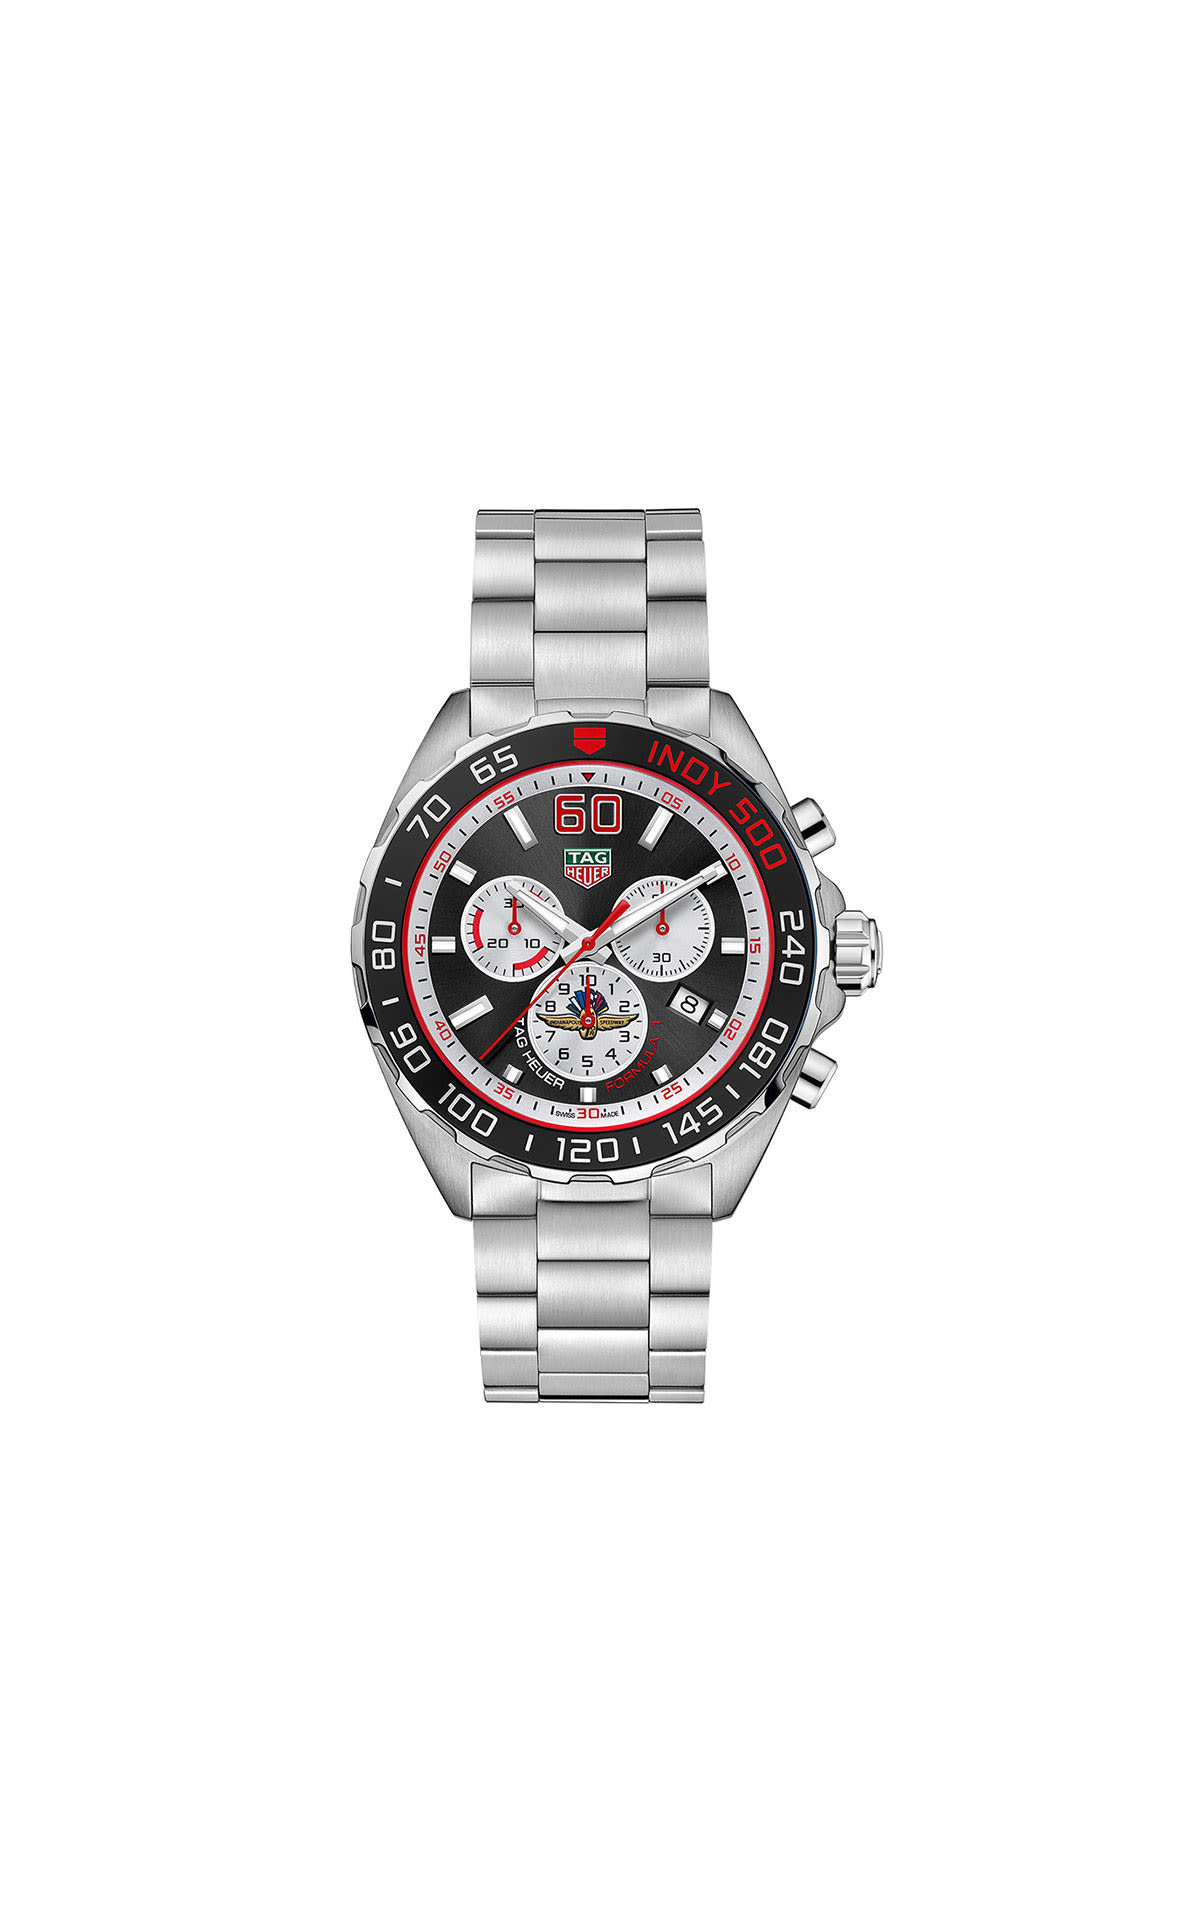 TAG Heuer Men’s formula 1 indy 500 special edition from Bicester Village